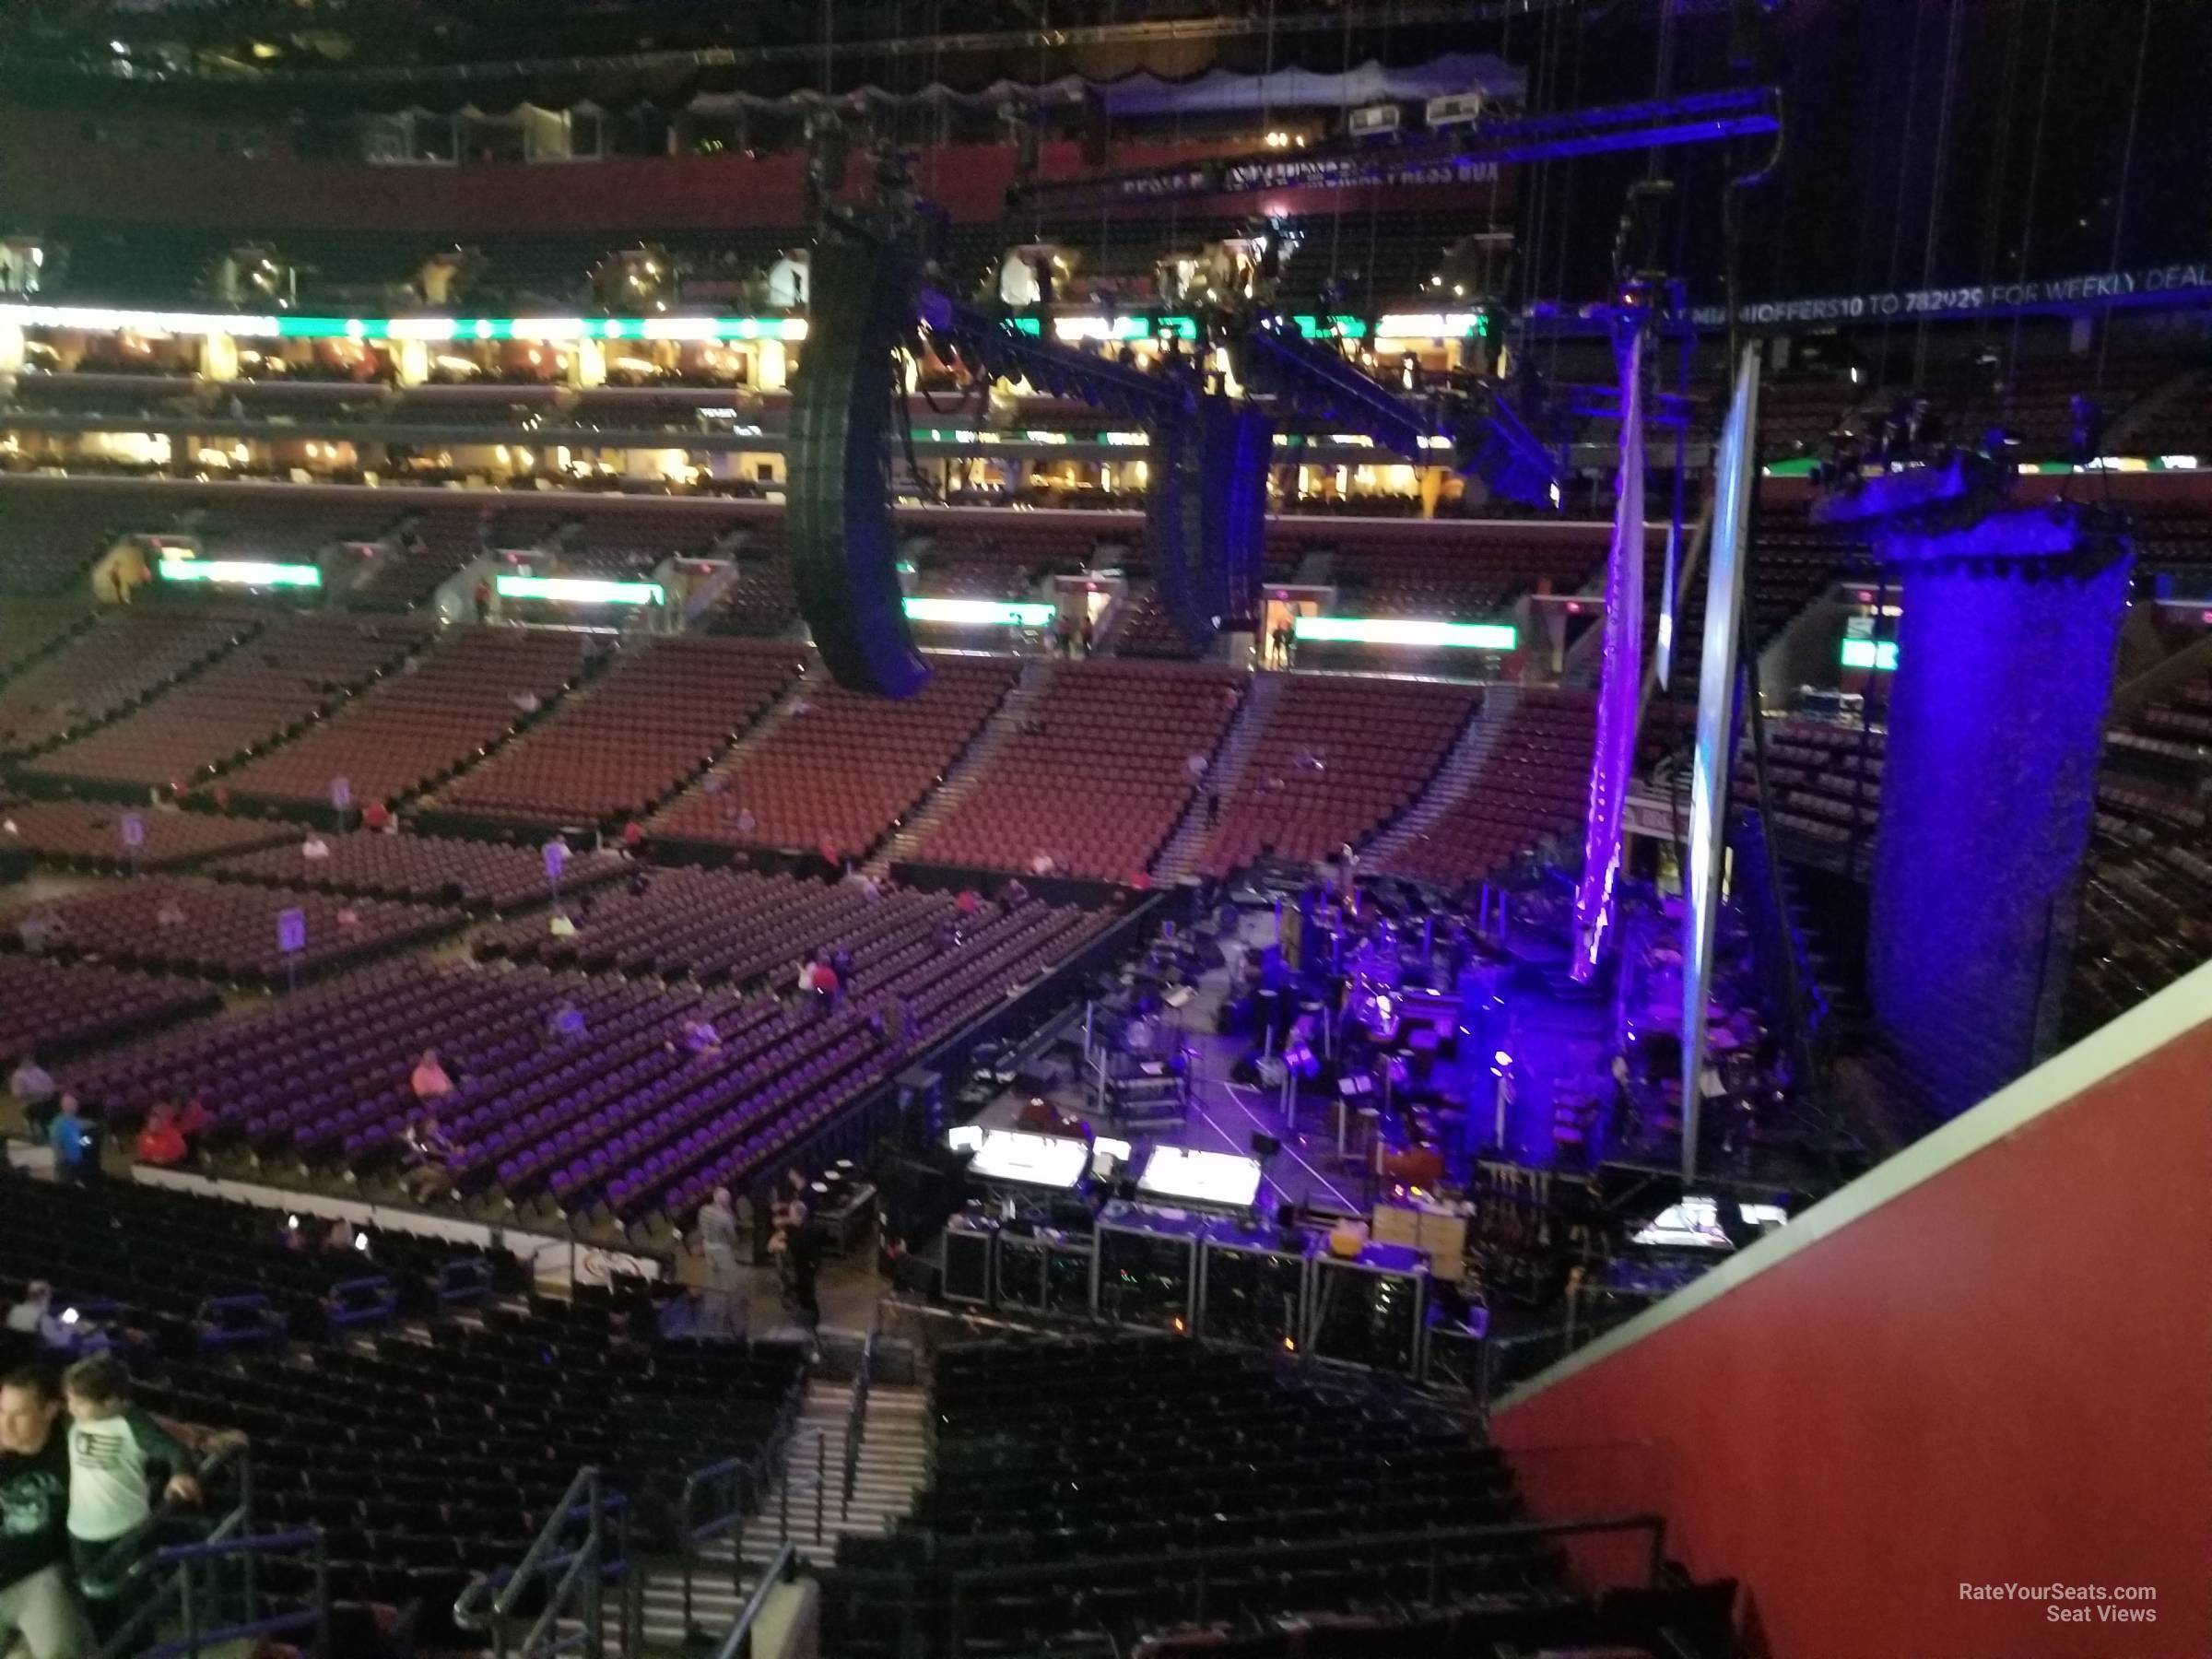 section 131, row 25 seat view  for concert - amerant bank arena